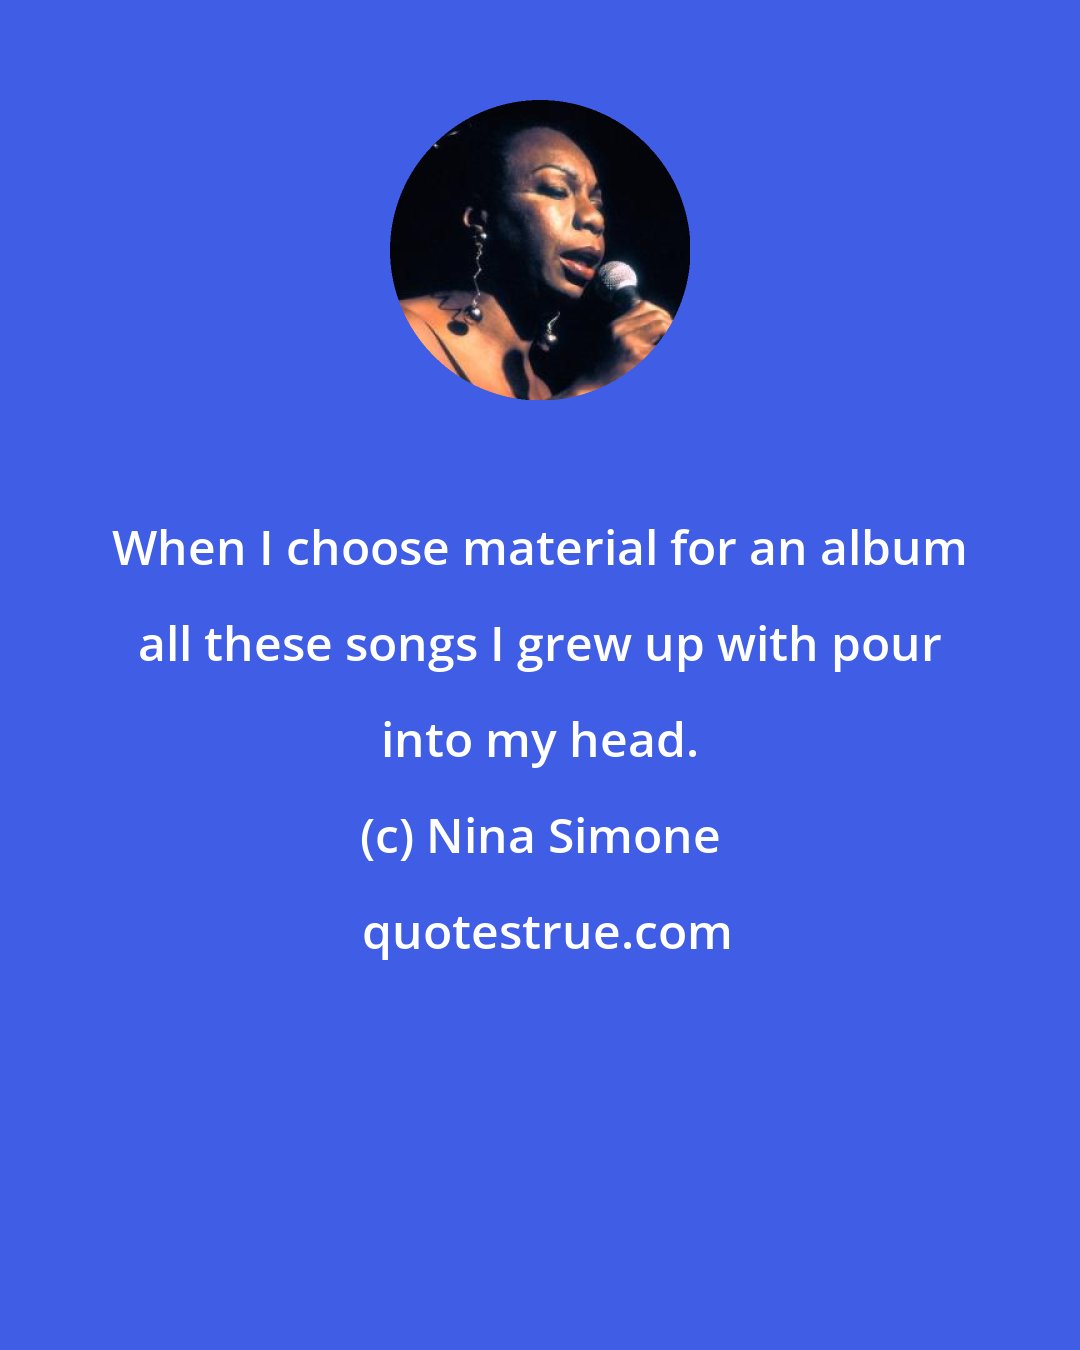 Nina Simone: When I choose material for an album all these songs I grew up with pour into my head.